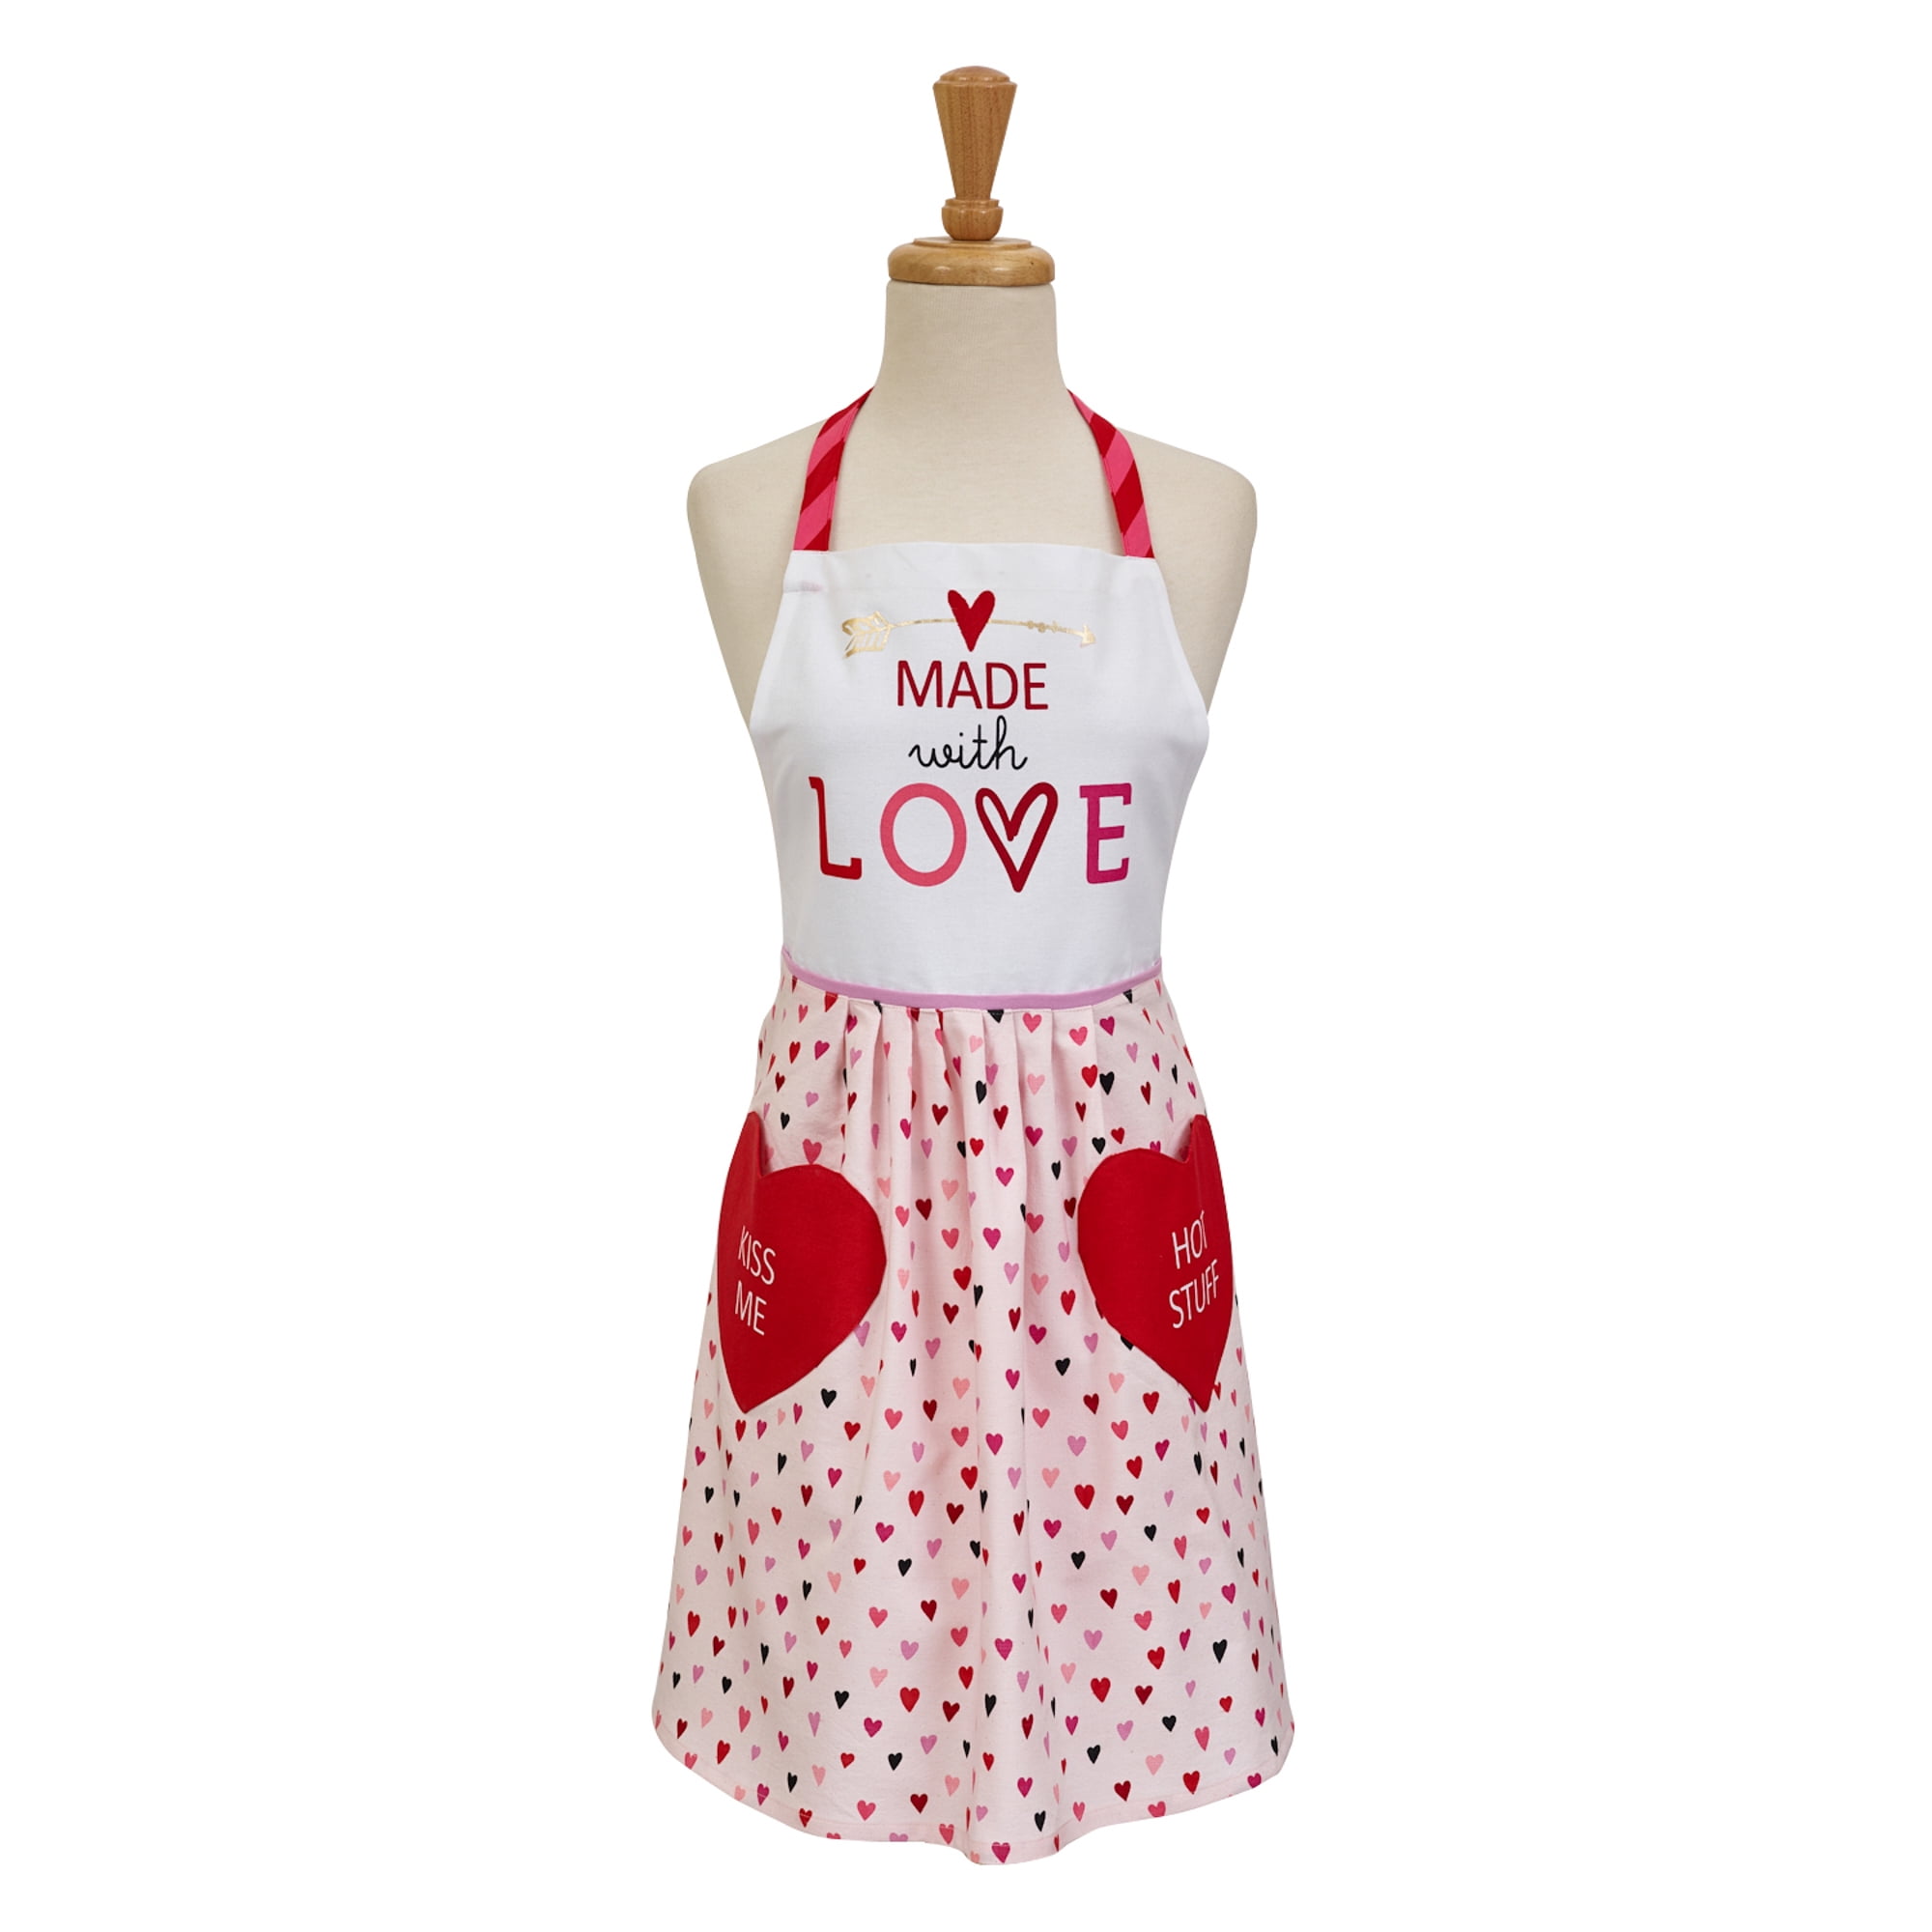 Design Imports Camz11093 Made With Love Print Skirt Apron